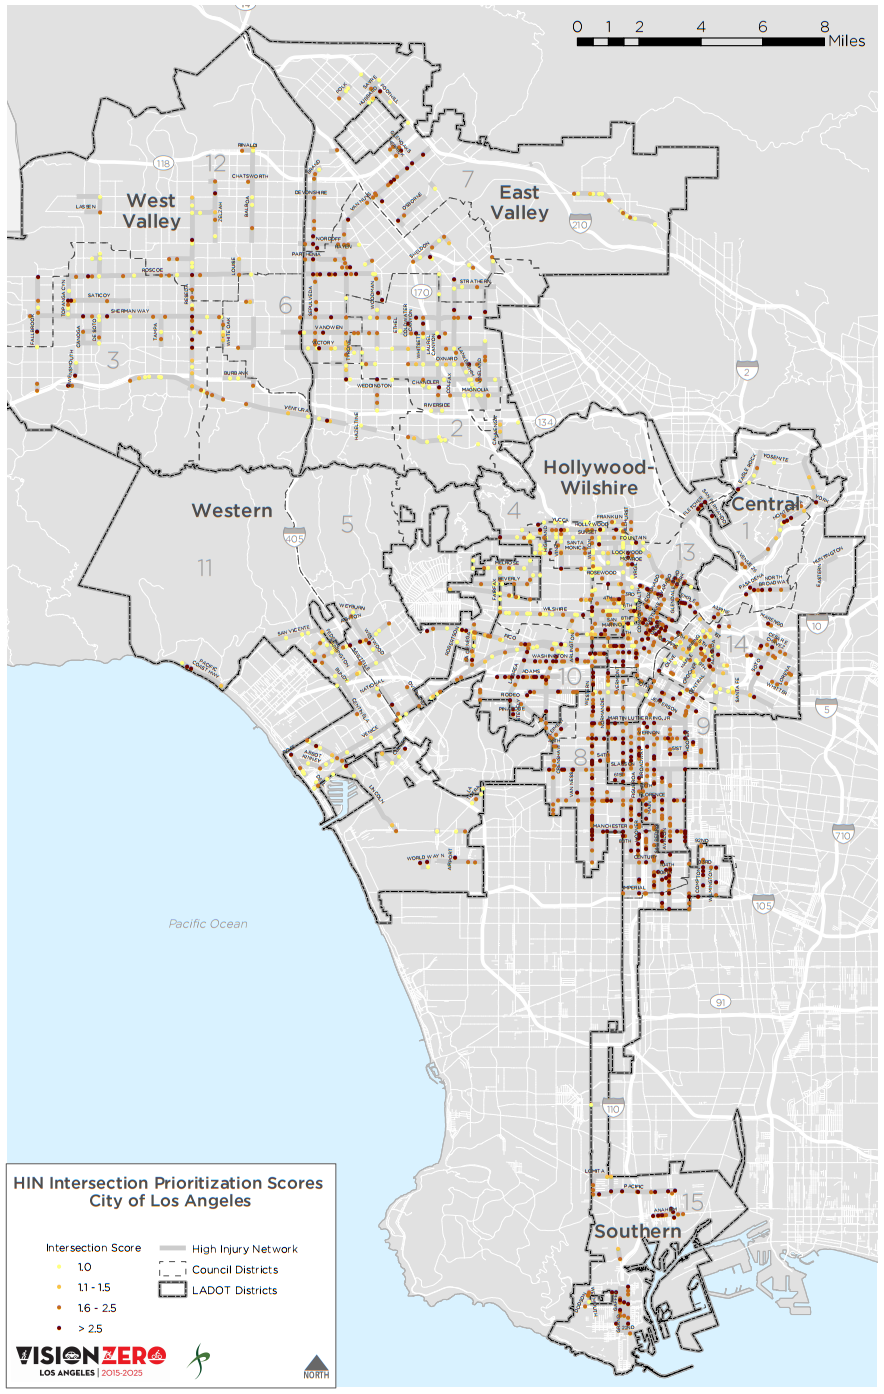 Vision Zero High Injury Network priority intersections. Map via Vision Zero L.A. website - click for higher resolution PDF